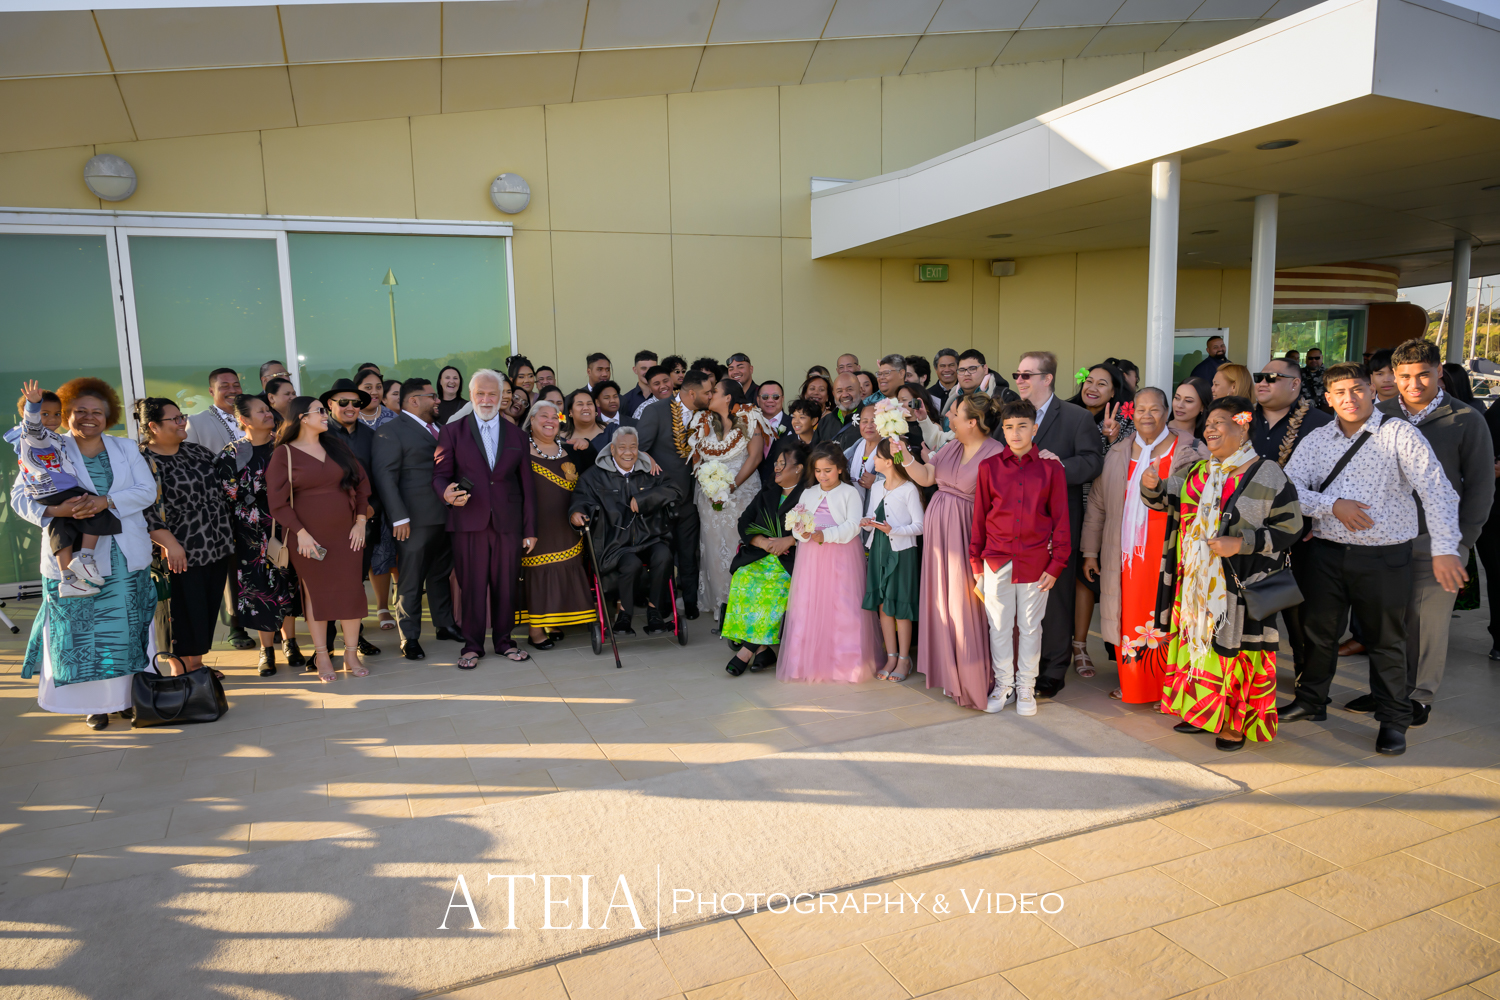 , Mariza and Tenisi&#8217;s wedding photography at Sandringham Yacht Club captured by ATEIA Photography &#038; Video